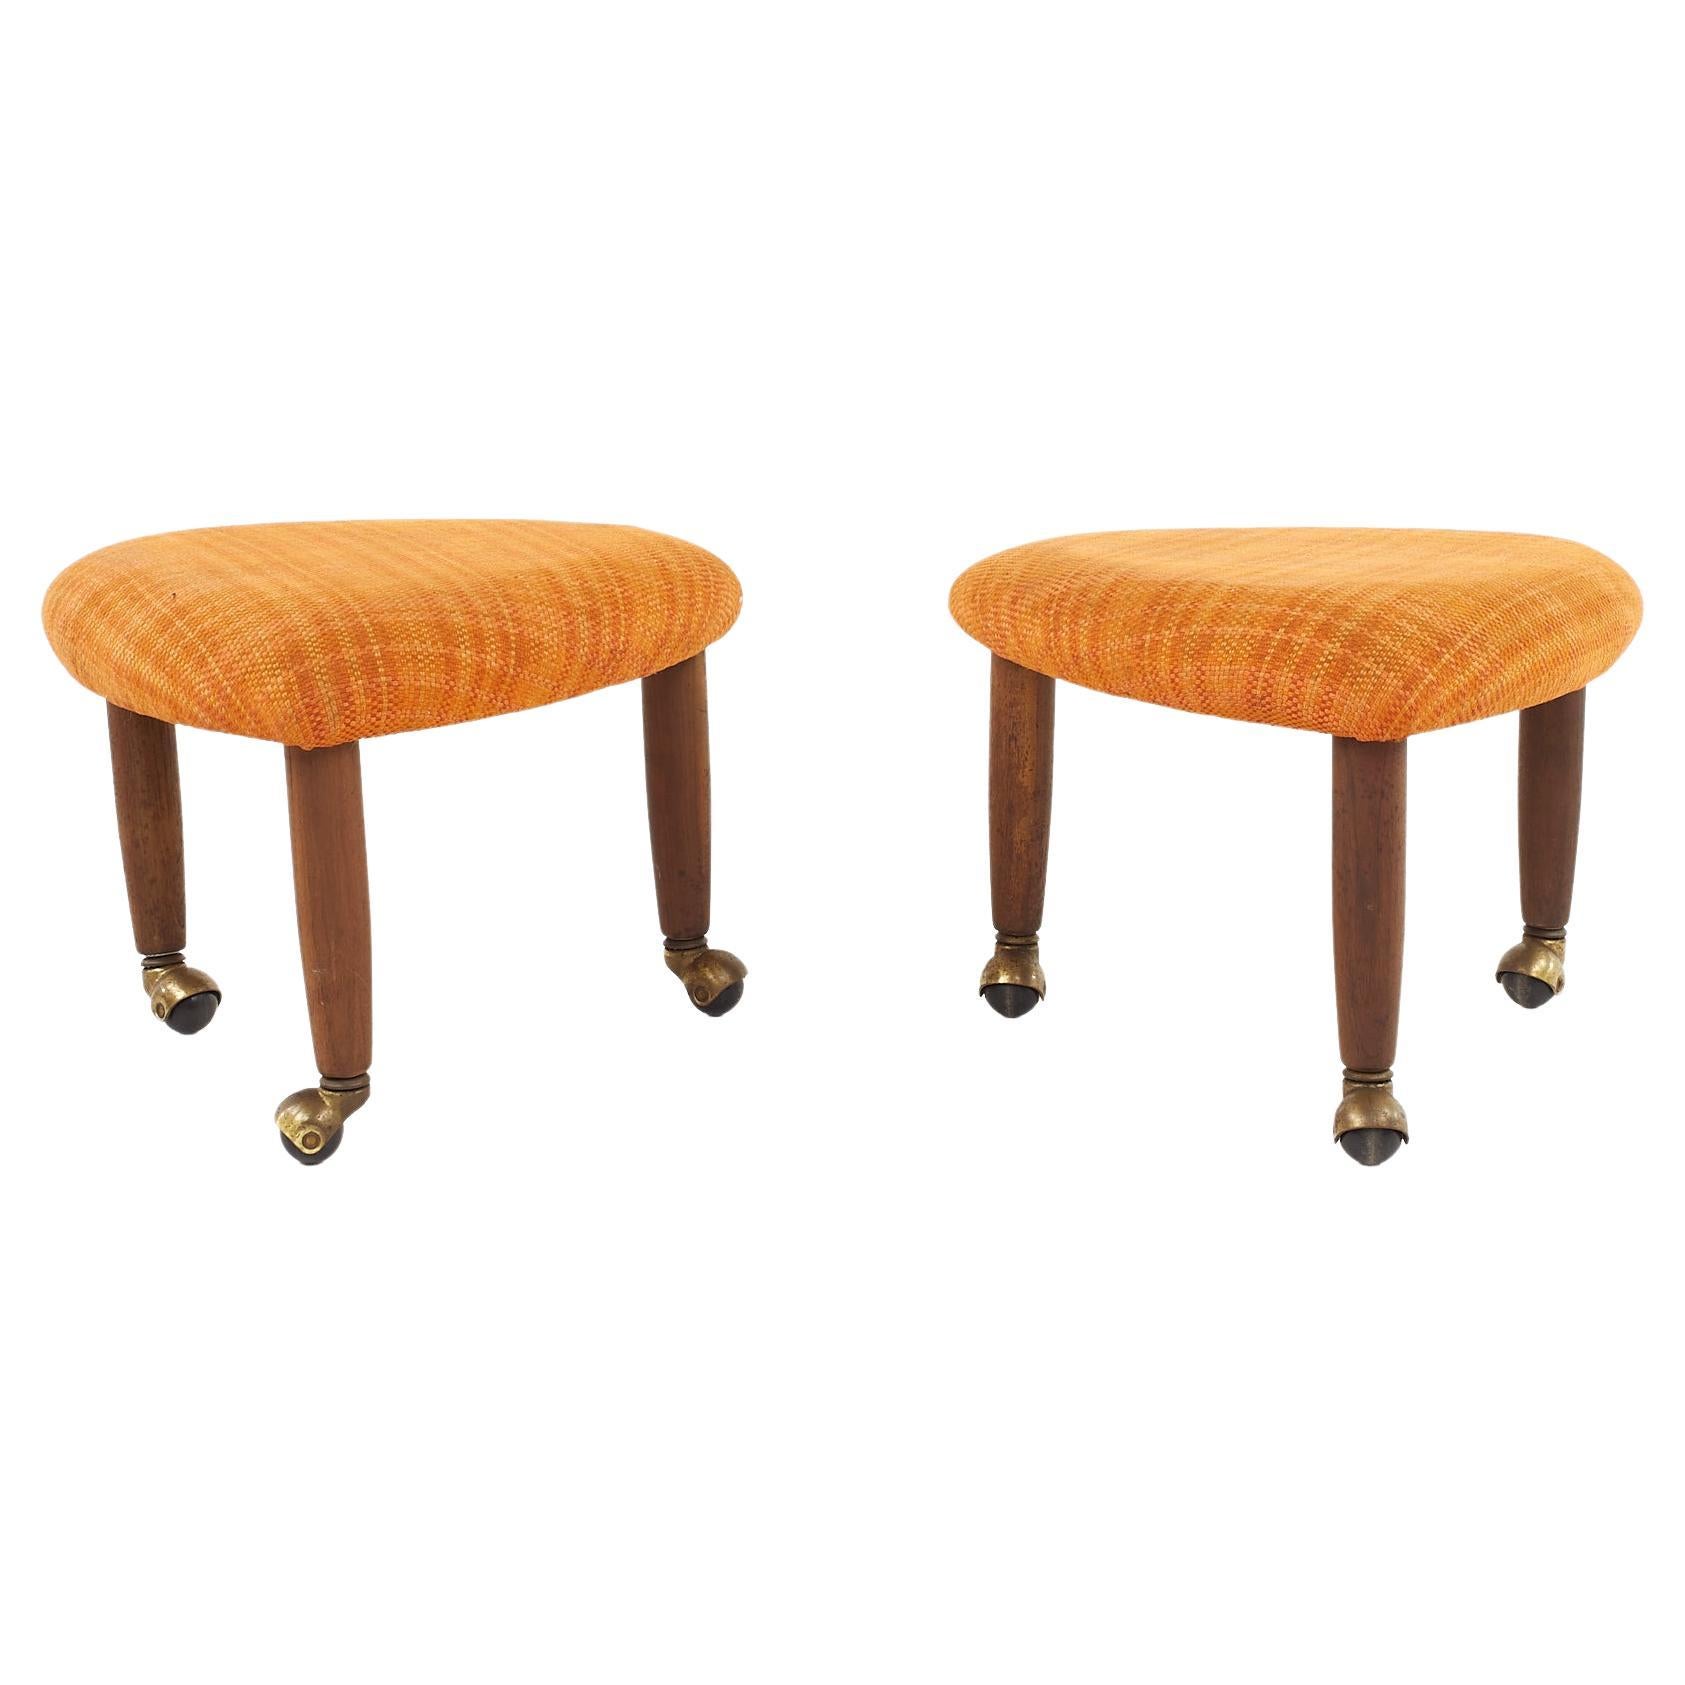 Adrian Pearsall for Craft Associates MCM Walnut Ottoman on Casters, a Pair